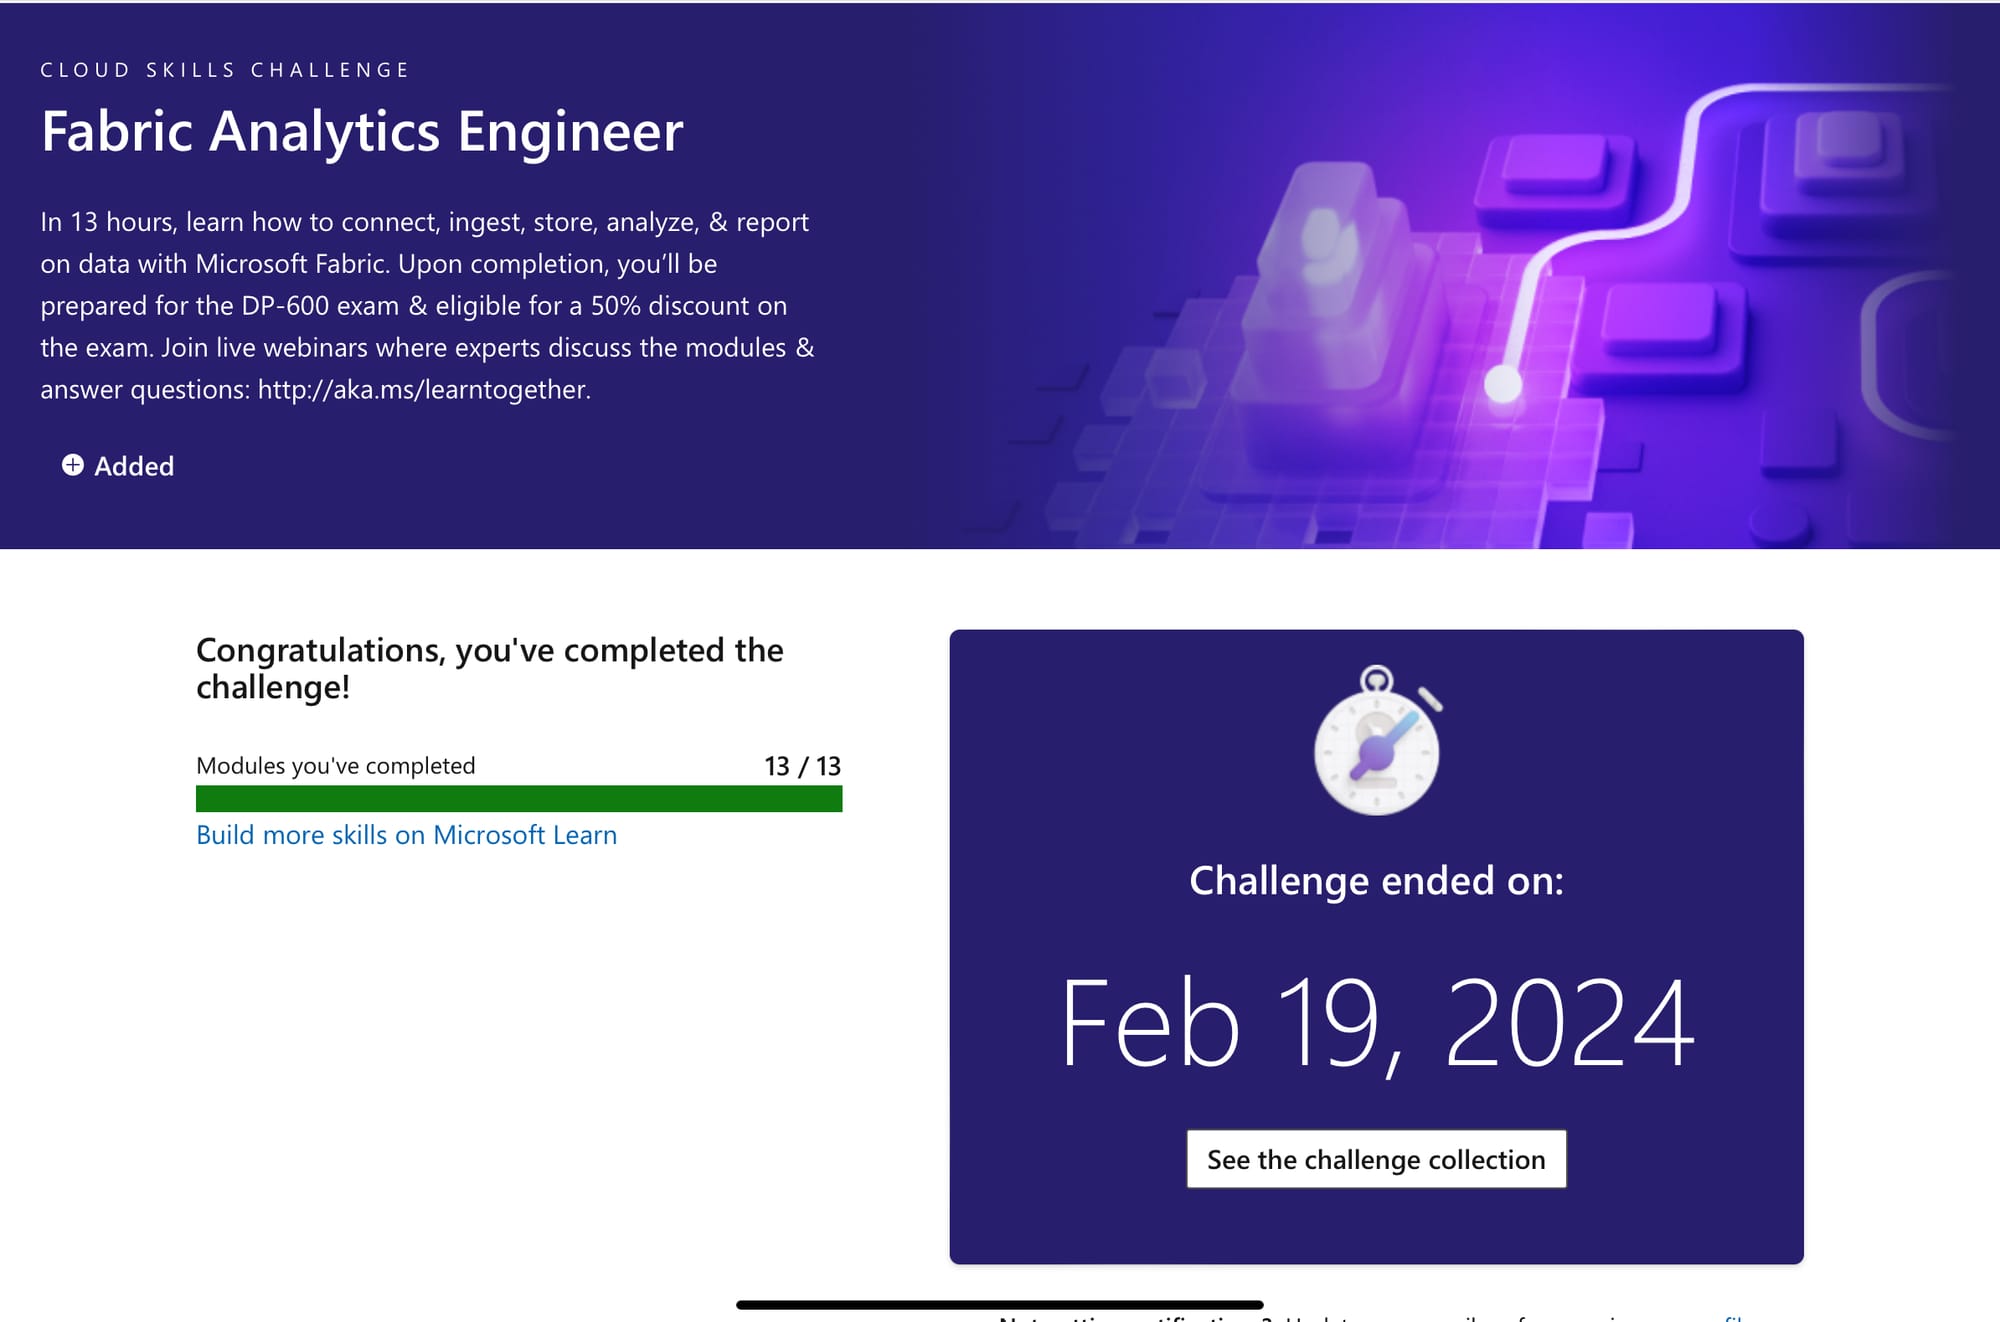 A screenshot of the Fabric Analytics Engineer challenge page shows 13/13 modules completed.